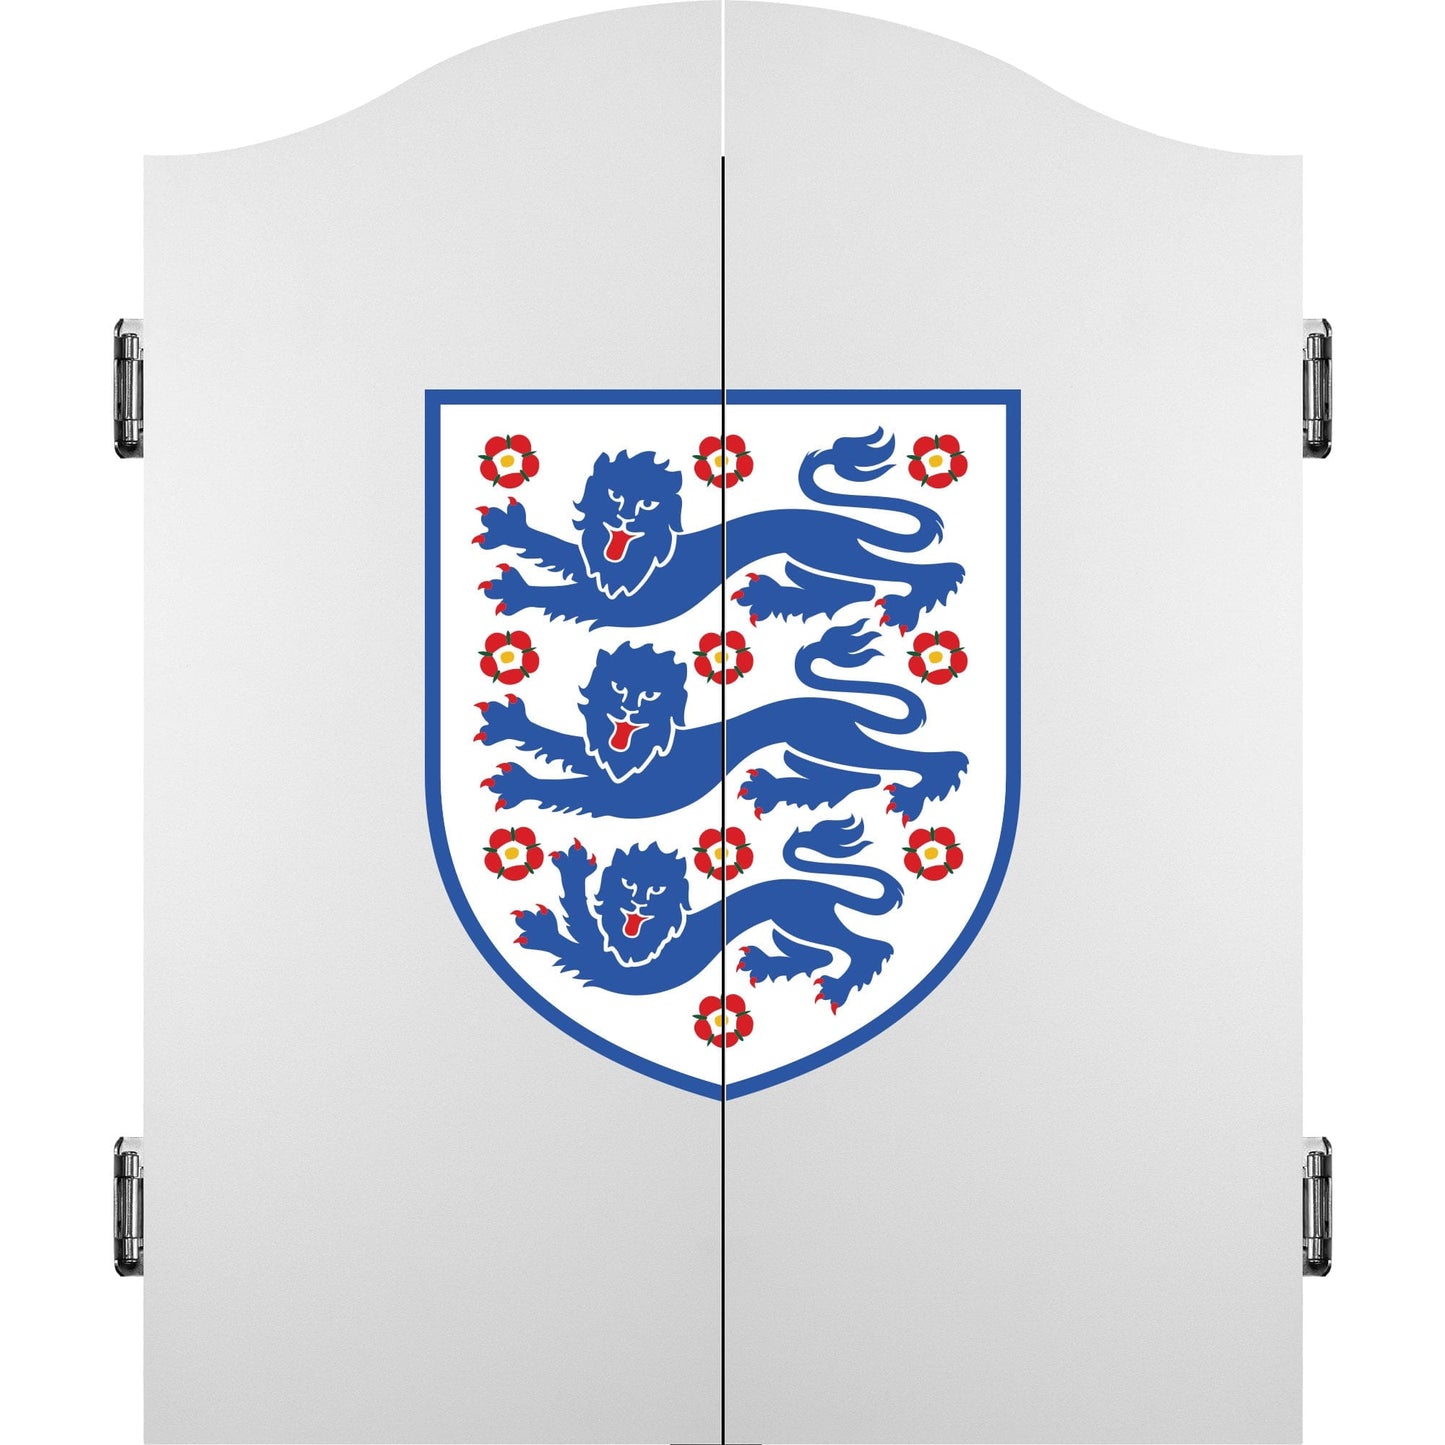 England Football Dartboard Cabinet - Official Licensed - C1 - White - 3 Lions Crest